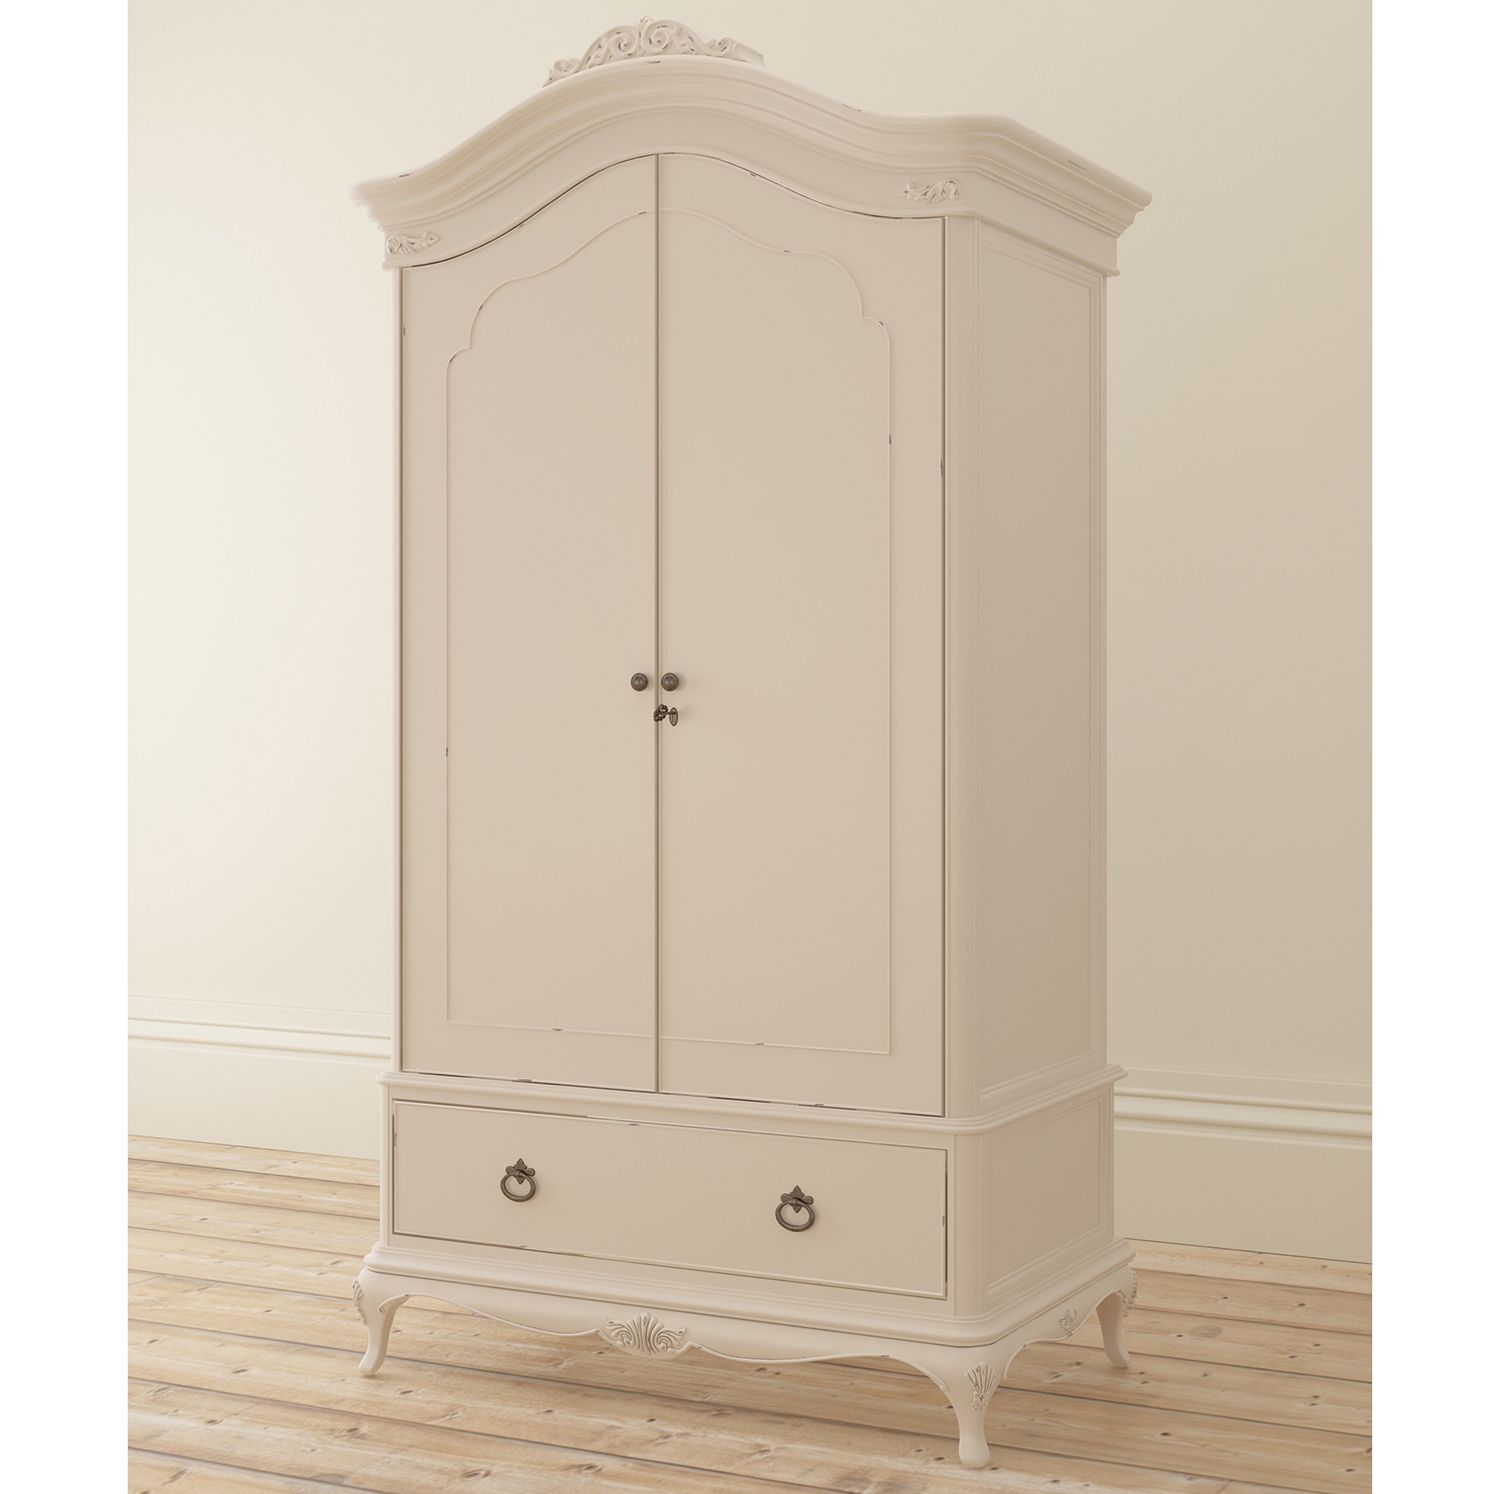 Willis & Gambier Ivory Double Wardrobe • Collingwood Batchellor Throughout Willis And Gambier Wardrobes (View 16 of 20)